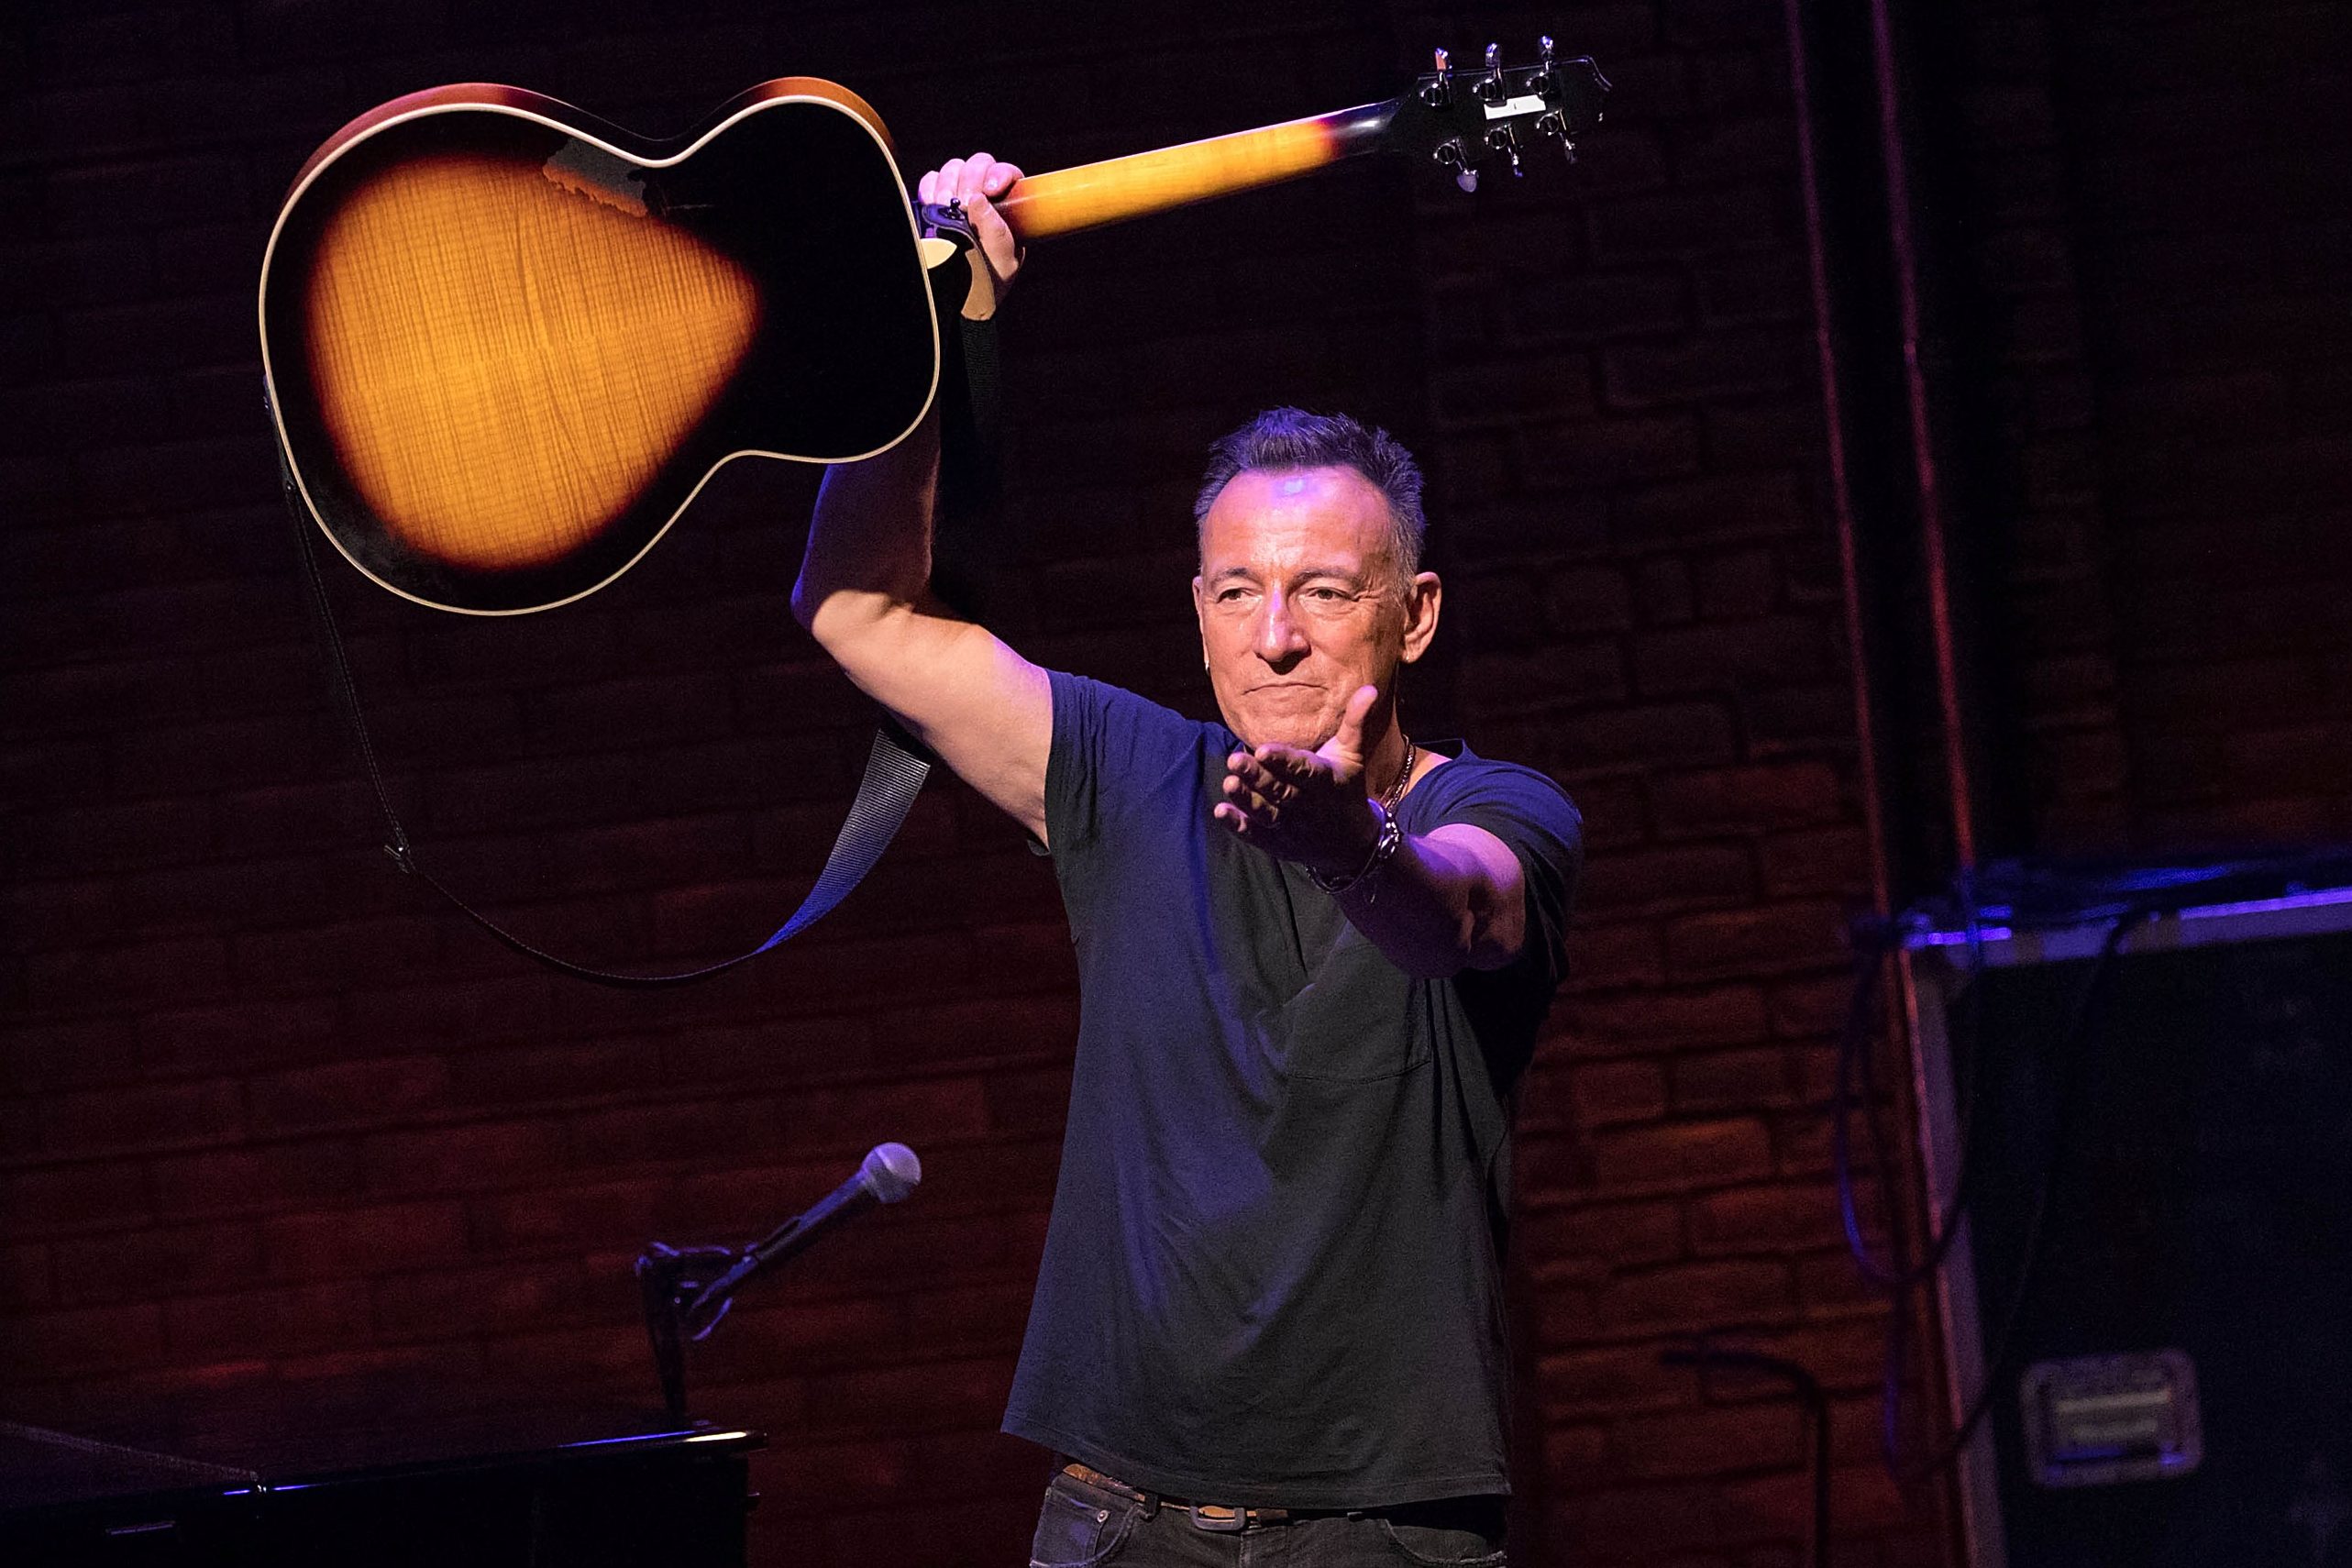 Bruce Springsteen takes his final "Springsteen on Broadway" curtain call in 2018